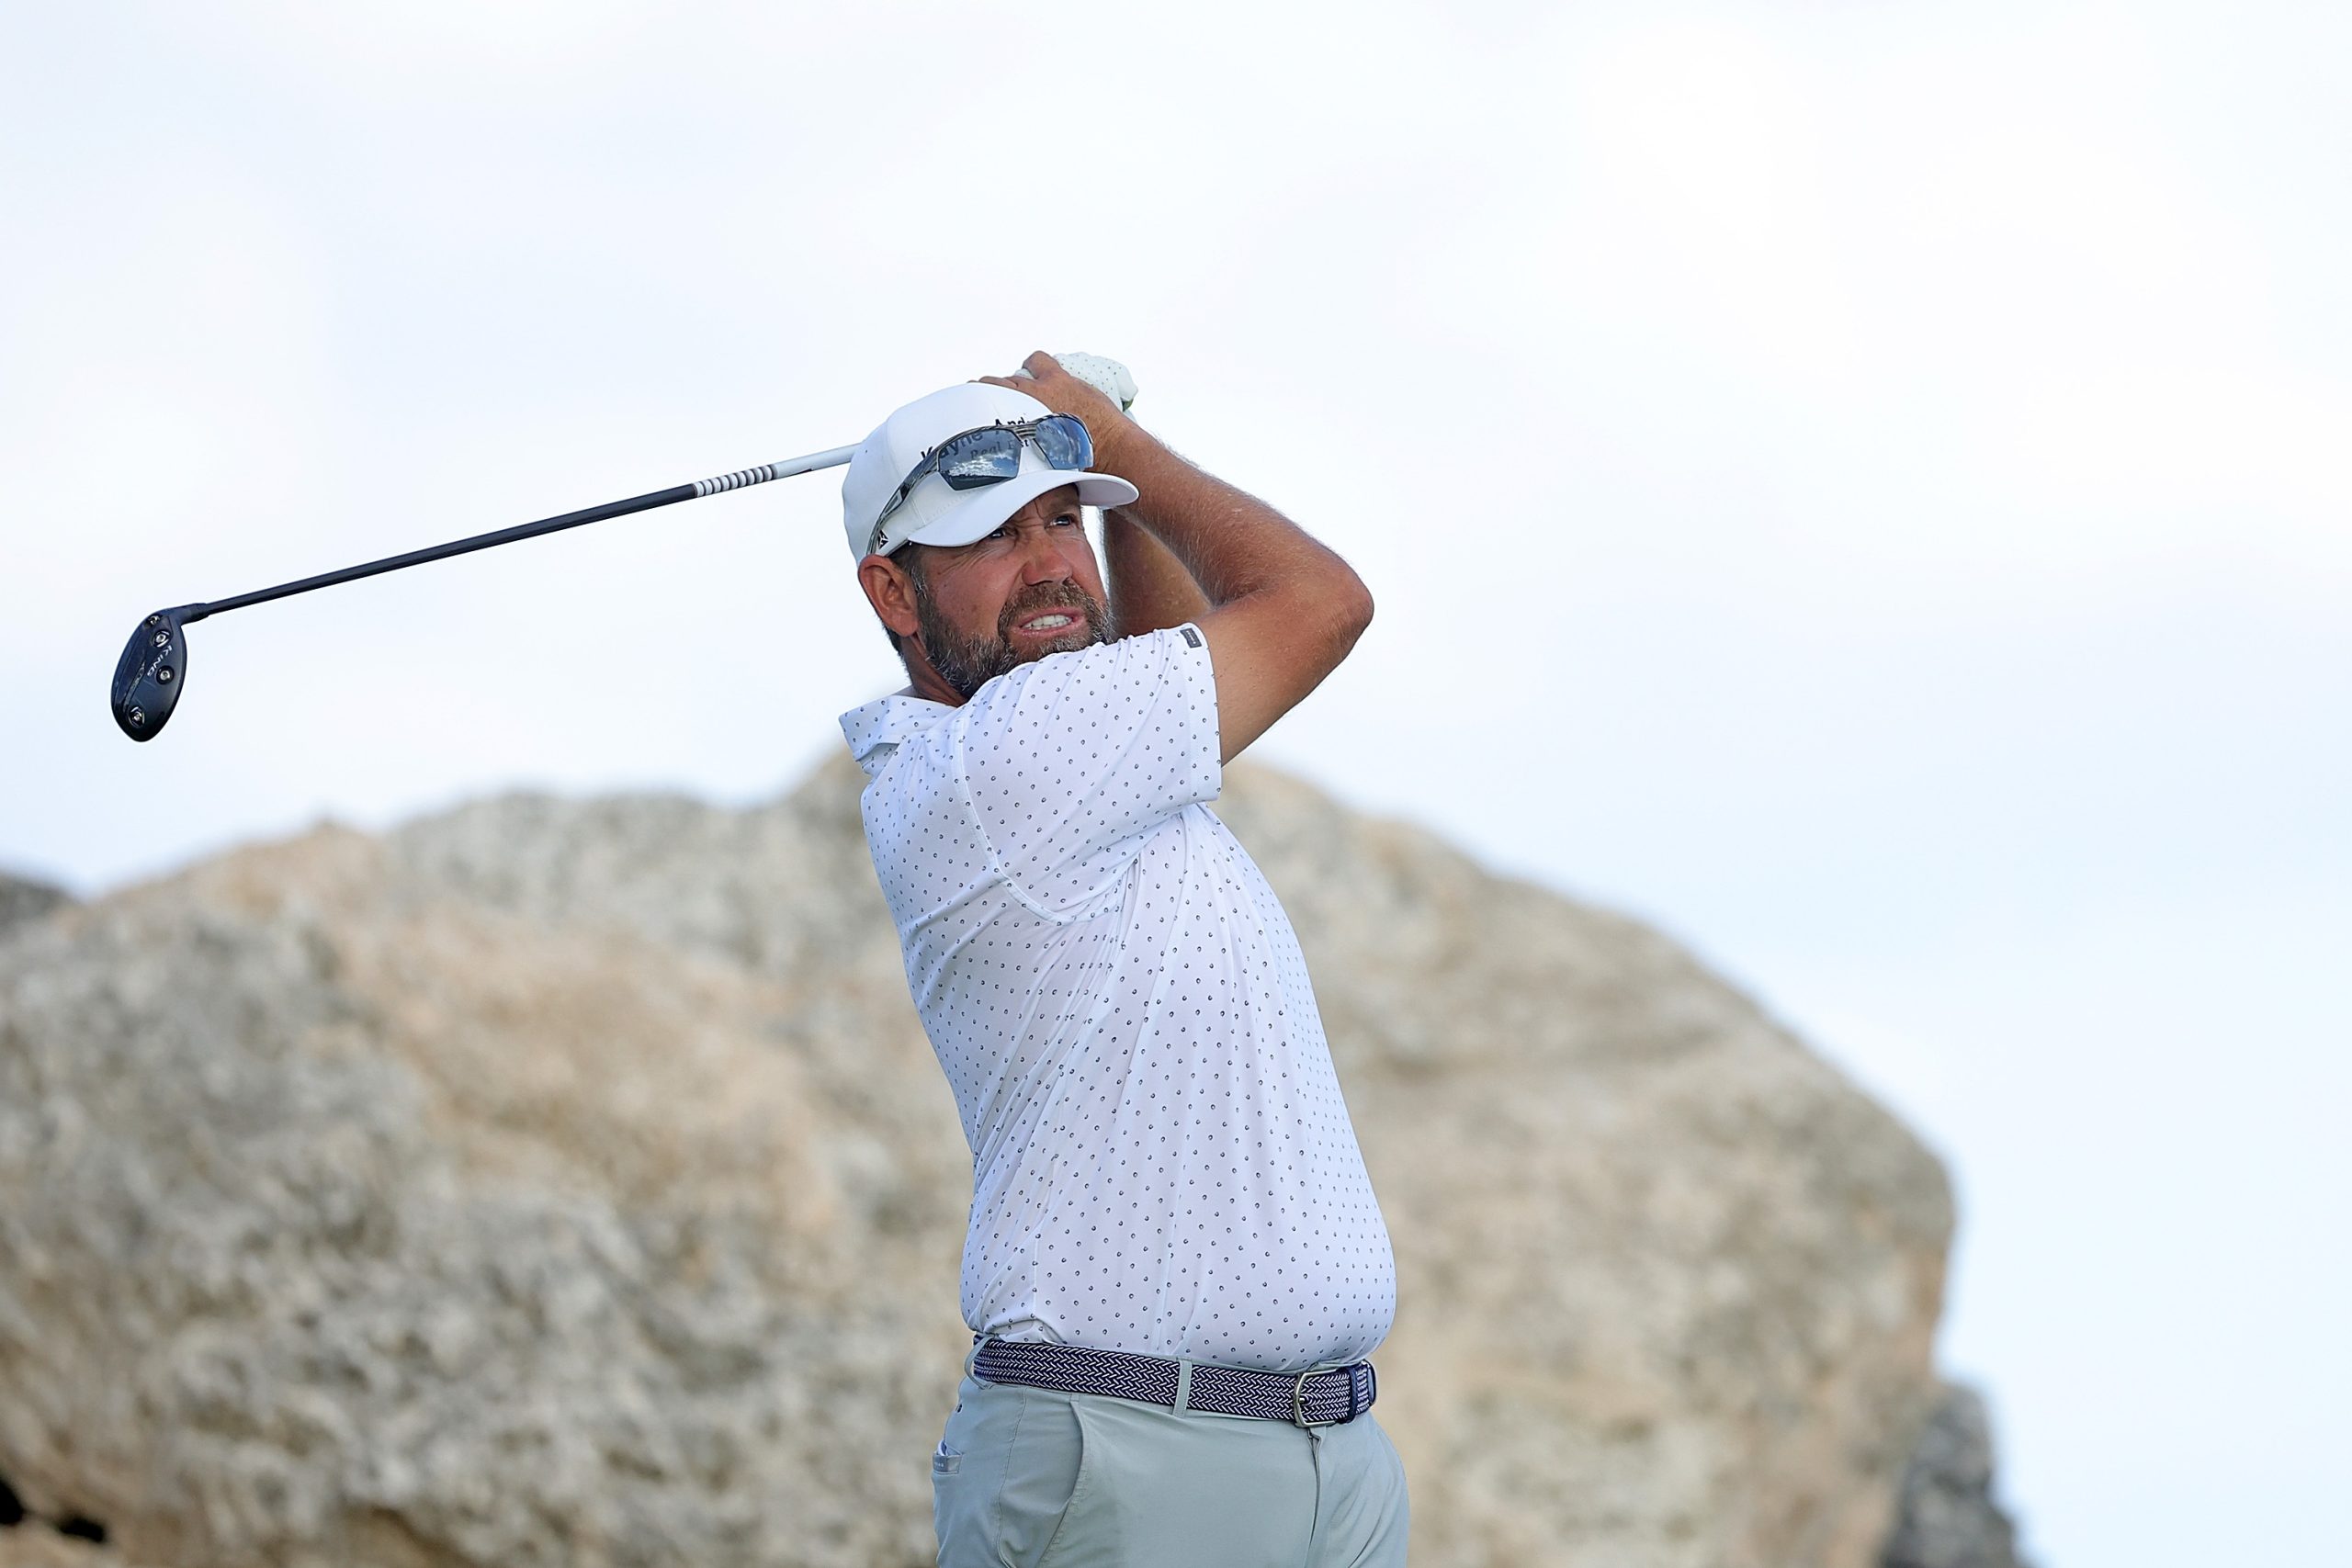 Report: PGA Tour golfer Erik Compton arrested, charged for domestic dispute in Florida